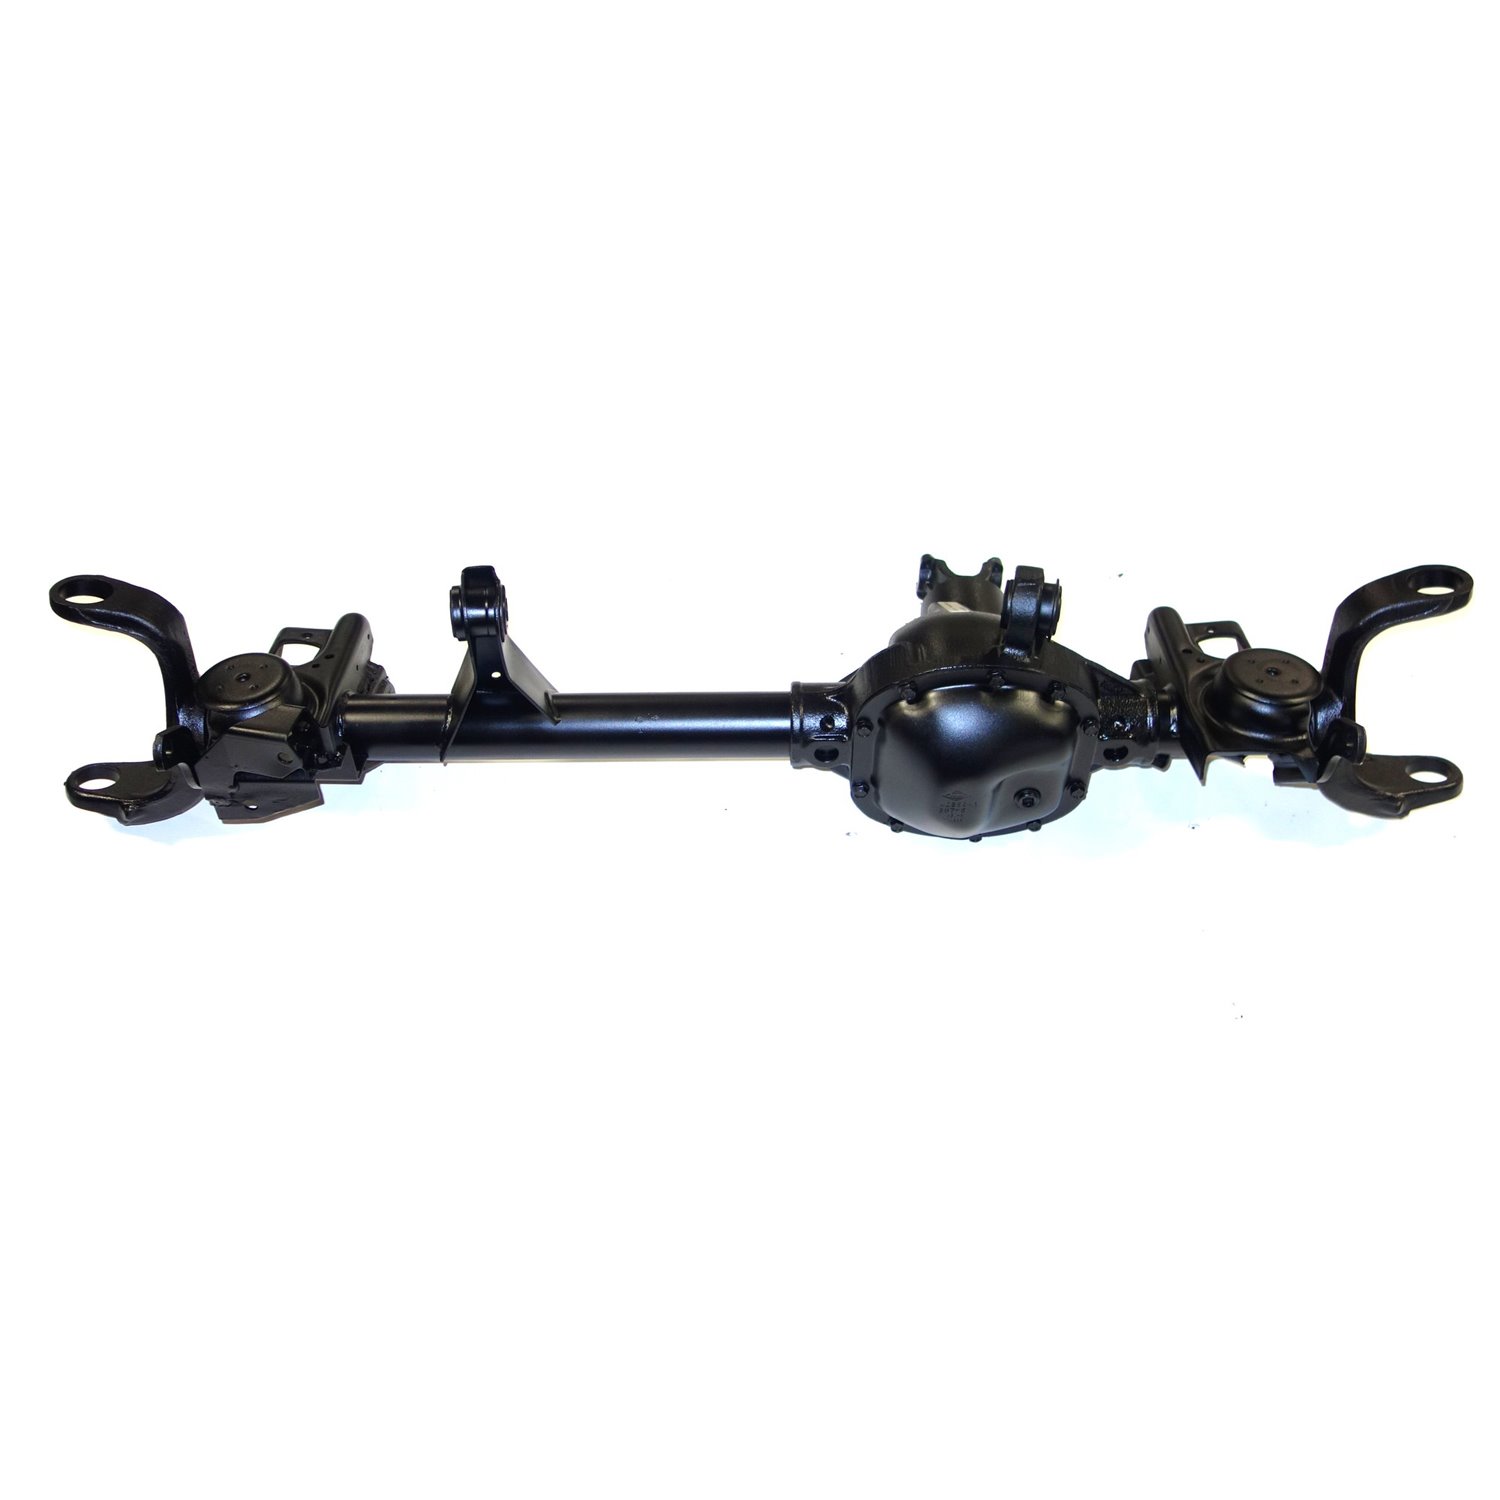 Remanufactured Complete Axle Assembly for Dana 30 97-99 Jeep Wrangler 4.11 Ratio, ABS